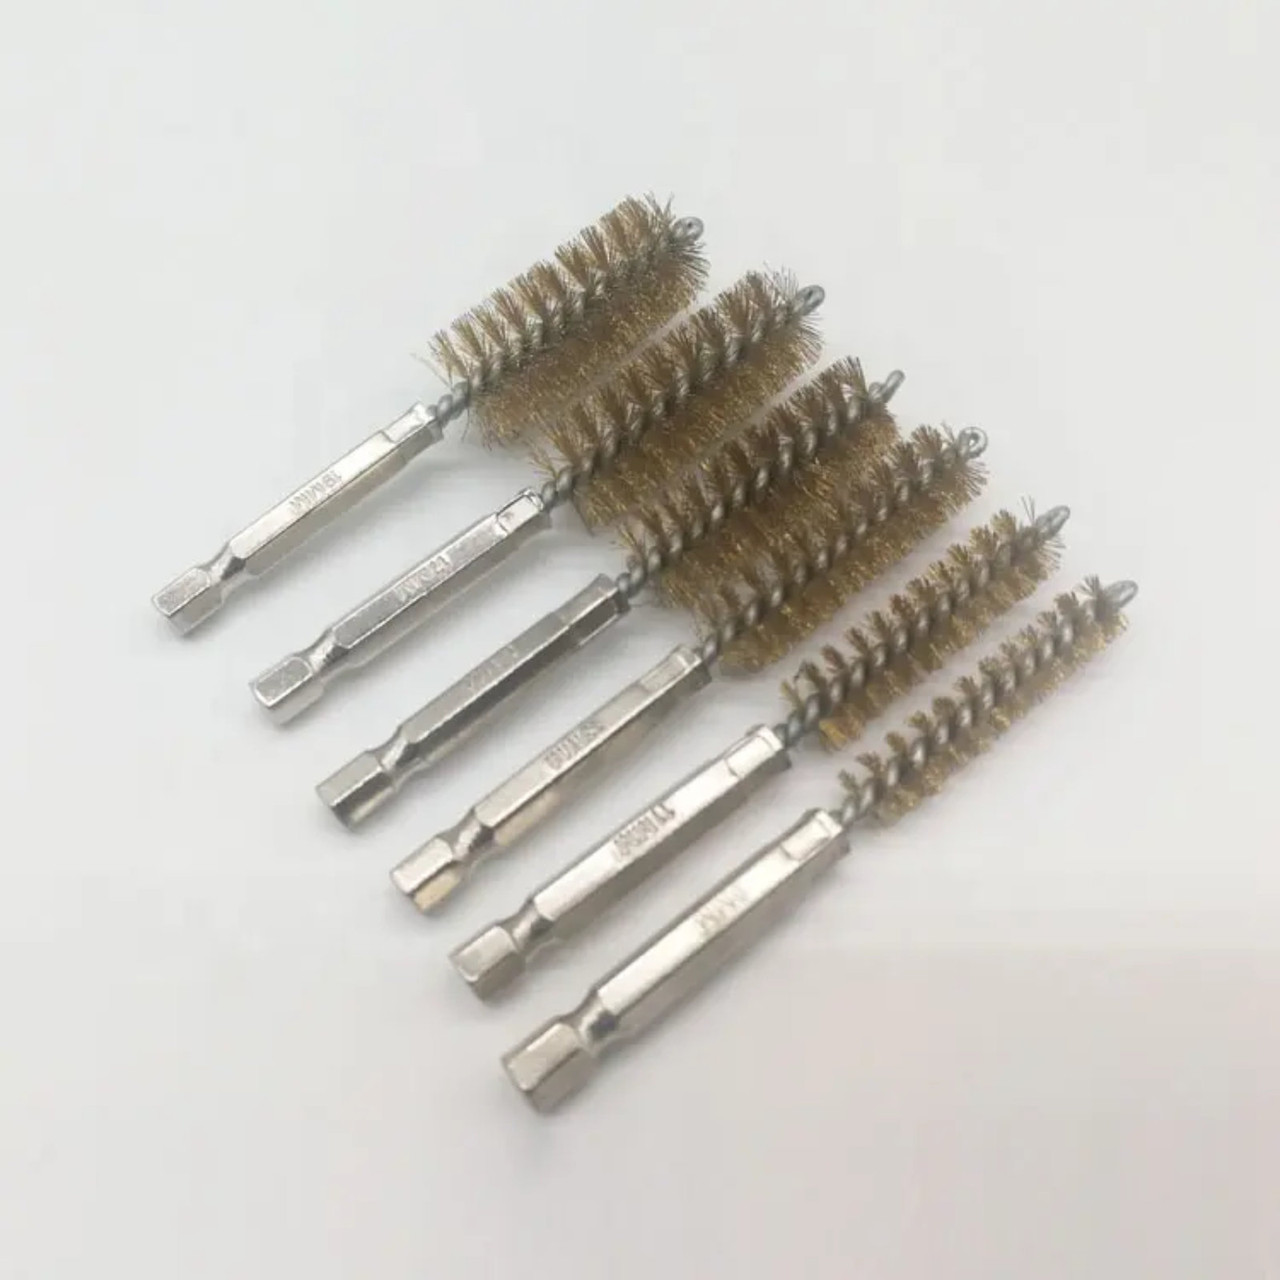 20pc Nylon, Brass, Stainless Steel Bore Cleaning 1/4" Drive Brush Set